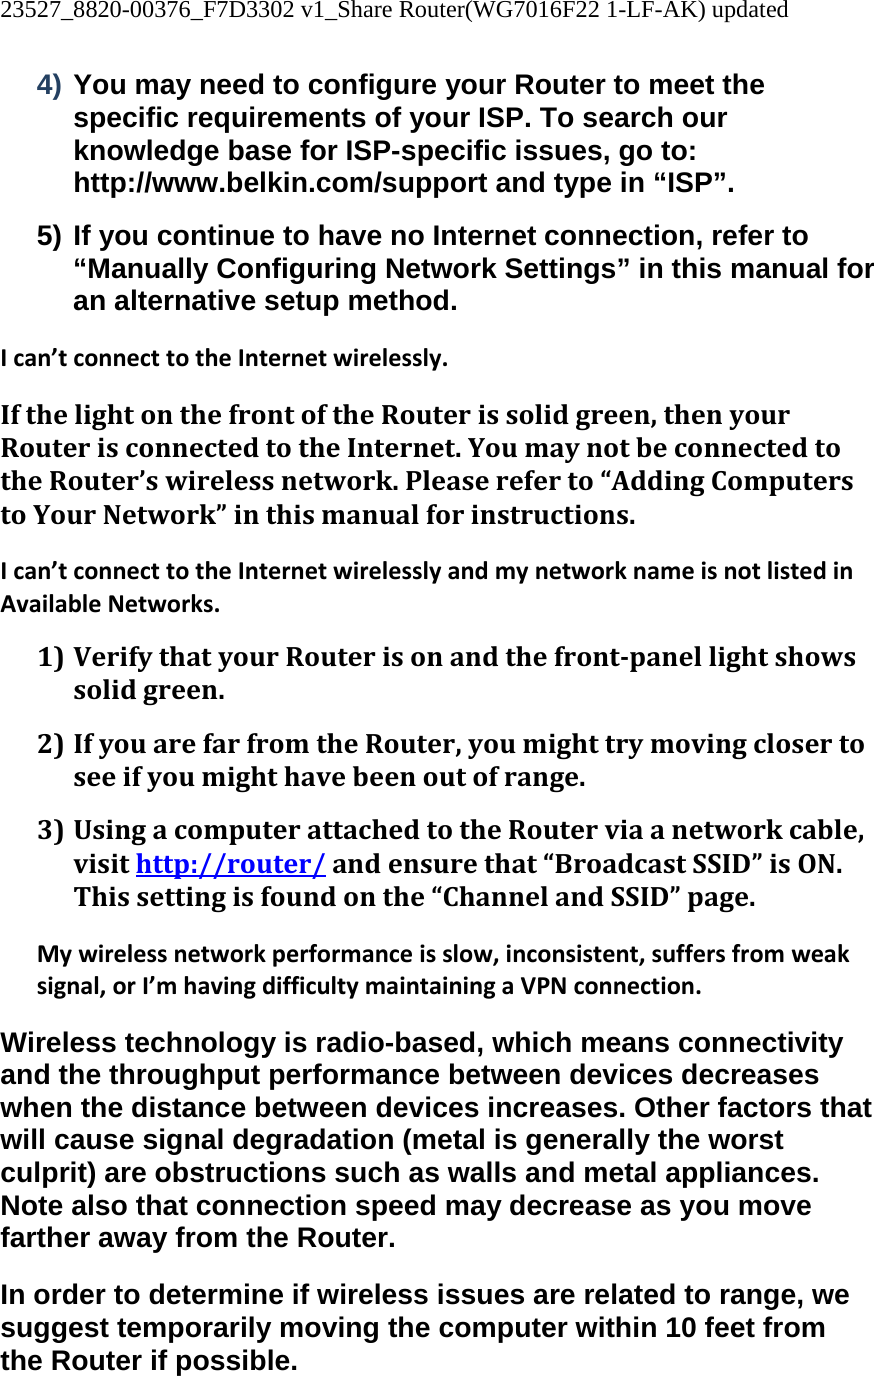 23527_8820-00376_F7D3302 v1_Share Router(WG7016F22 1-LF-AK) updated  4) You may need to configure your Router to meet the specific requirements of your ISP. To search our knowledge base for ISP-specific issues, go to: http://www.belkin.com/support and type in “ISP”. 5) If you continue to have no Internet connection, refer to “Manually Configuring Network Settings” in this manual for an alternative setup method. Ican’tconnecttotheInternetwirelessly.IfthelightonthefrontoftheRouterissolidgreen,thenyourRouterisconnectedtotheInternet.YoumaynotbeconnectedtotheRouter’swirelessnetwork.Pleasereferto“AddingComputerstoYourNetwork”inthismanualforinstructions.Ican’tconnecttotheInternetwirelesslyandmynetworknameisnotlistedinAvailableNetworks.1) VerifythatyourRouterisonandthefrontpanellightshowssolidgreen.2) IfyouarefarfromtheRouter,youmighttrymovingclosertoseeifyoumighthavebeenoutofrange.3) UsingacomputerattachedtotheRouterviaanetworkcable,visithttp://router/andensurethat“BroadcastSSID”isON.Thissettingisfoundonthe“ChannelandSSID”page.Mywirelessnetworkperformanceisslow,inconsistent,suffersfromweaksignal,orI’mhavingdifficultymaintainingaVPNconnection.Wireless technology is radio-based, which means connectivity and the throughput performance between devices decreases when the distance between devices increases. Other factors that will cause signal degradation (metal is generally the worst culprit) are obstructions such as walls and metal appliances. Note also that connection speed may decrease as you move farther away from the Router. In order to determine if wireless issues are related to range, we suggest temporarily moving the computer within 10 feet from the Router if possible. 